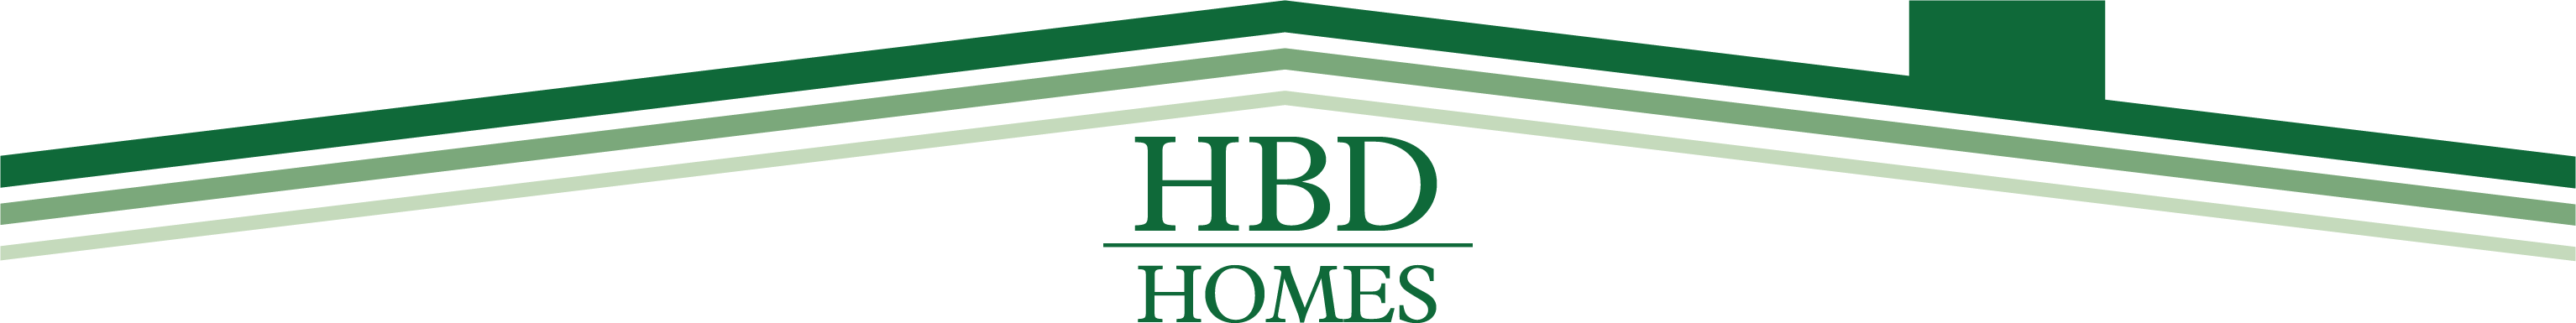 HBD Homes-Not Just Any Home, an HBD Home!